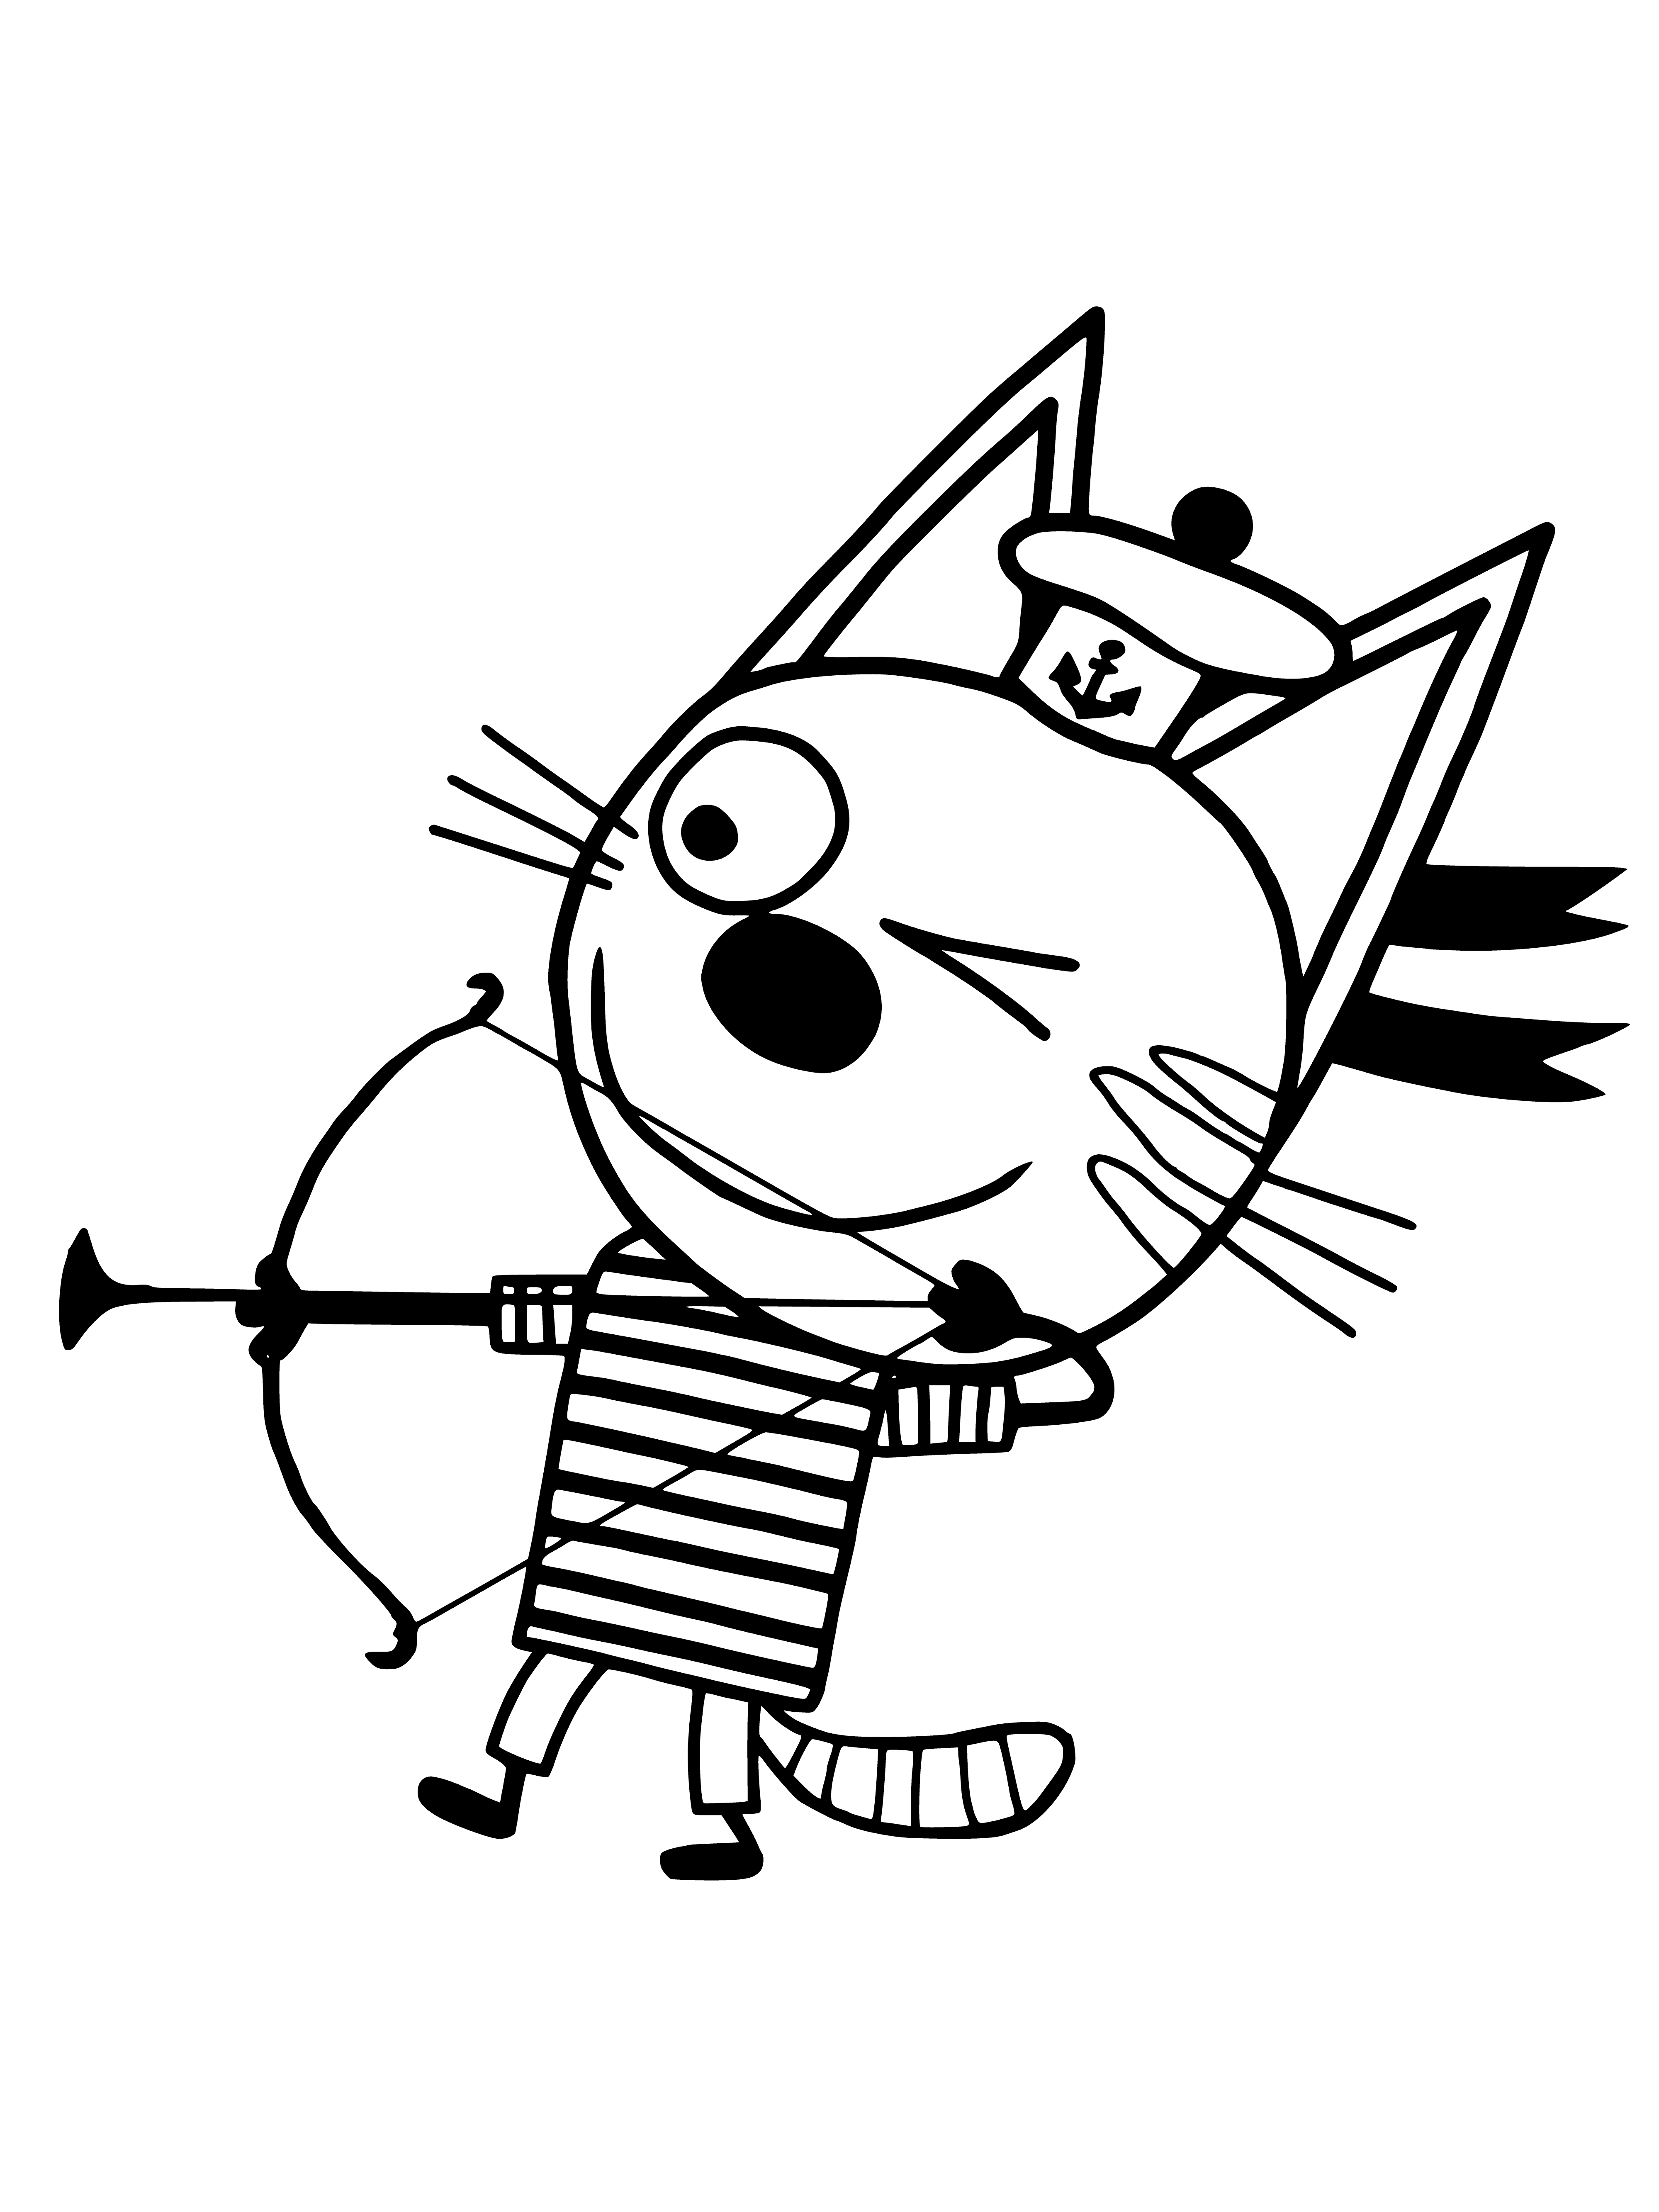 coloring page: 3 cats: white shoots, black looks, gray looks; white open, black open, gray closed.